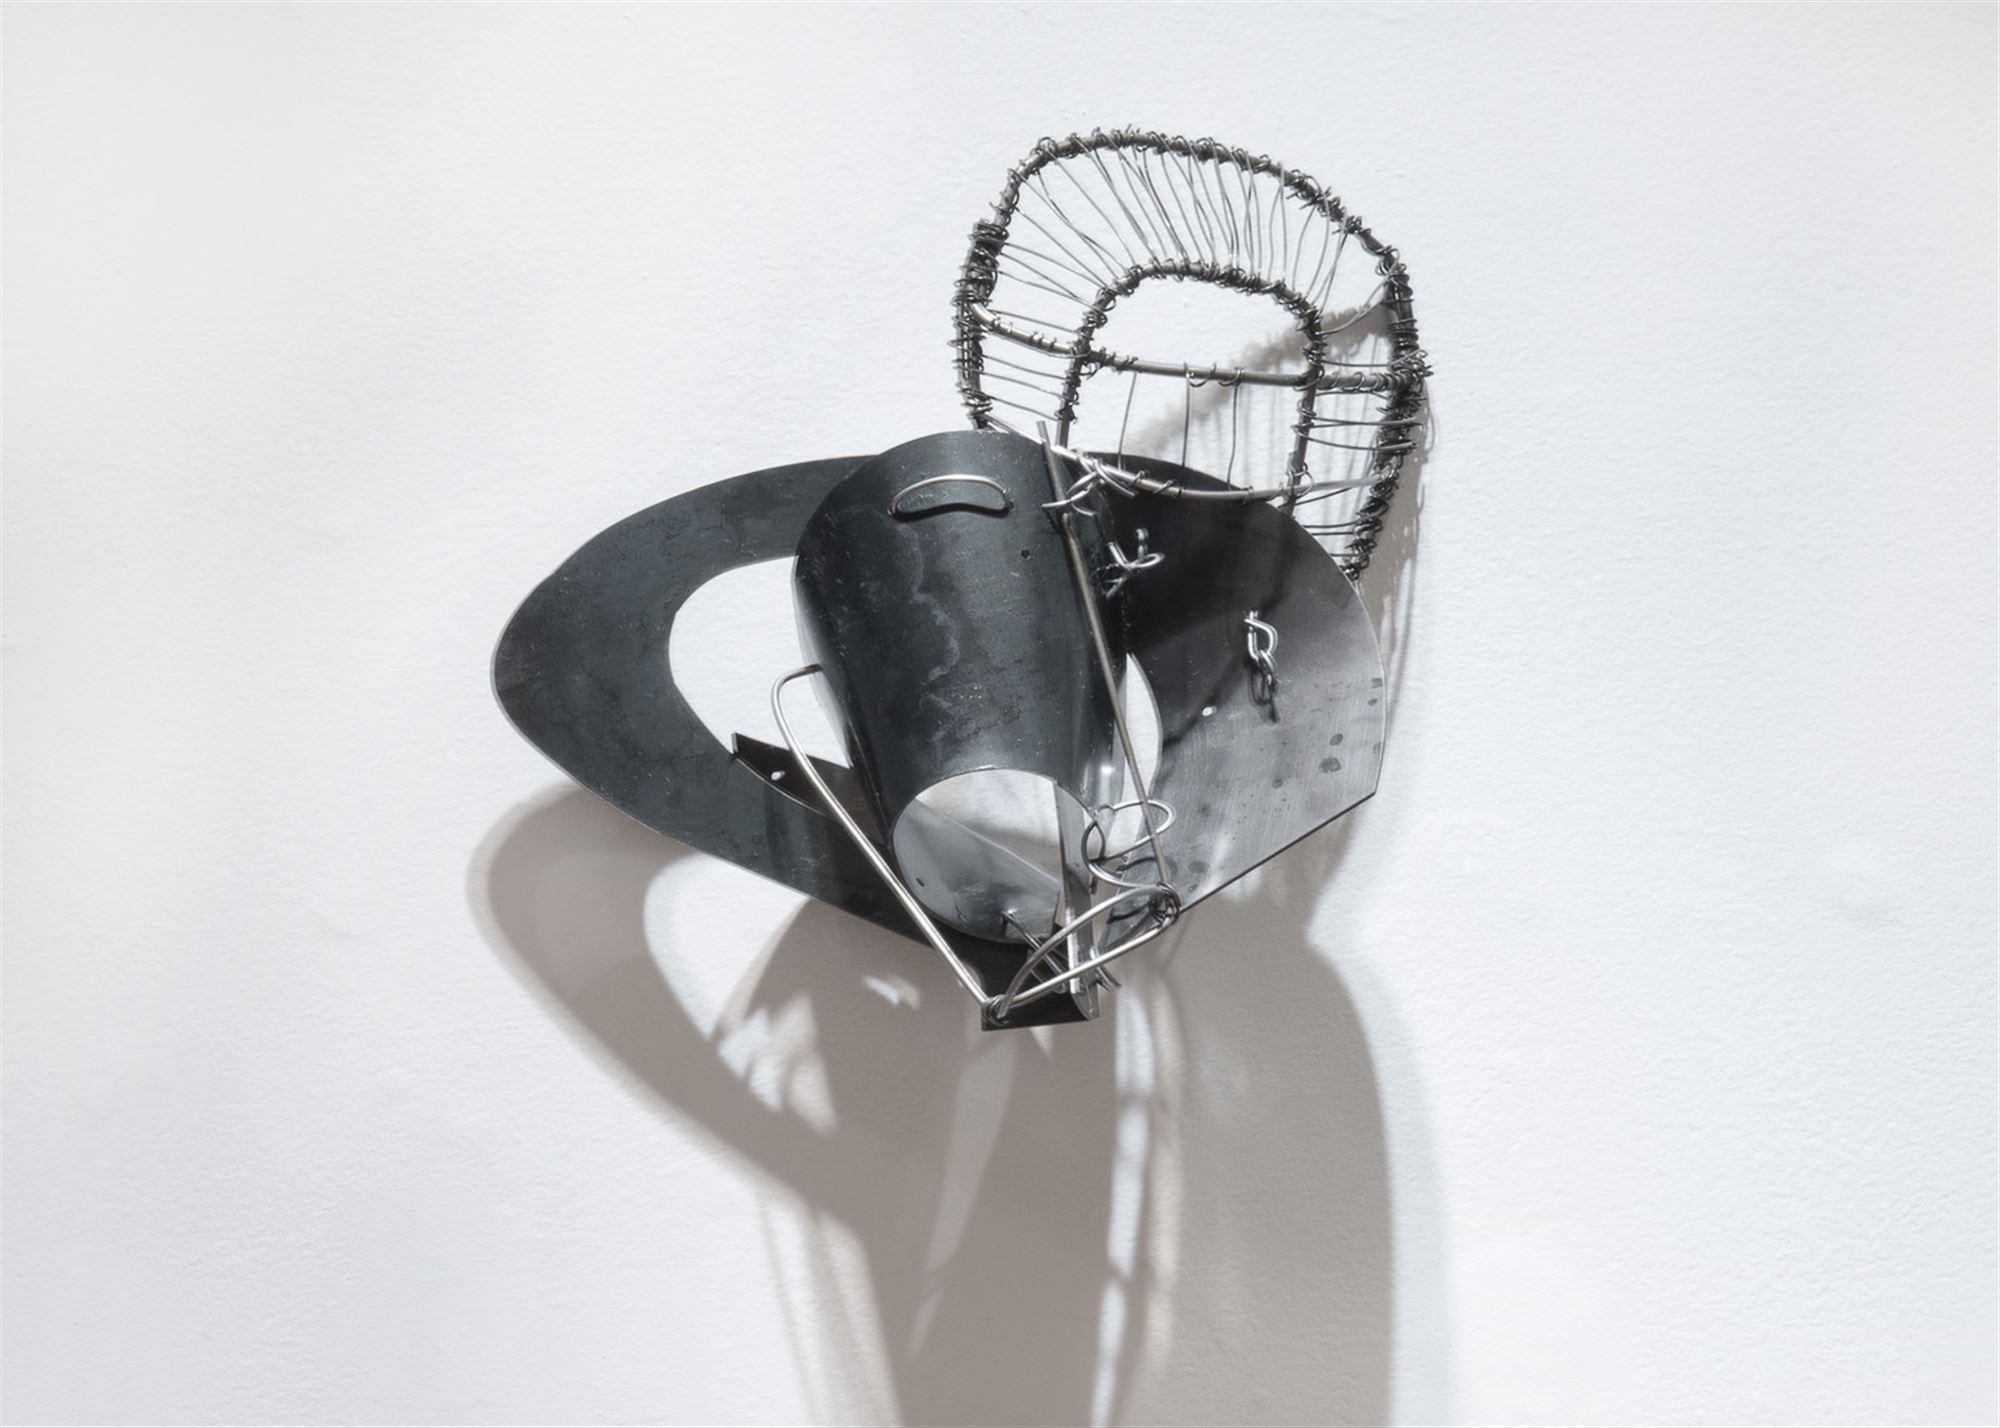 
		                					Victoria Bell		                																	
																											<i>Solar System,</i>  
																																								2016, 
																																								steel rod, steel sheet, binding wire, 
																																								15 x 13 x 6 inches 
																								
		                				